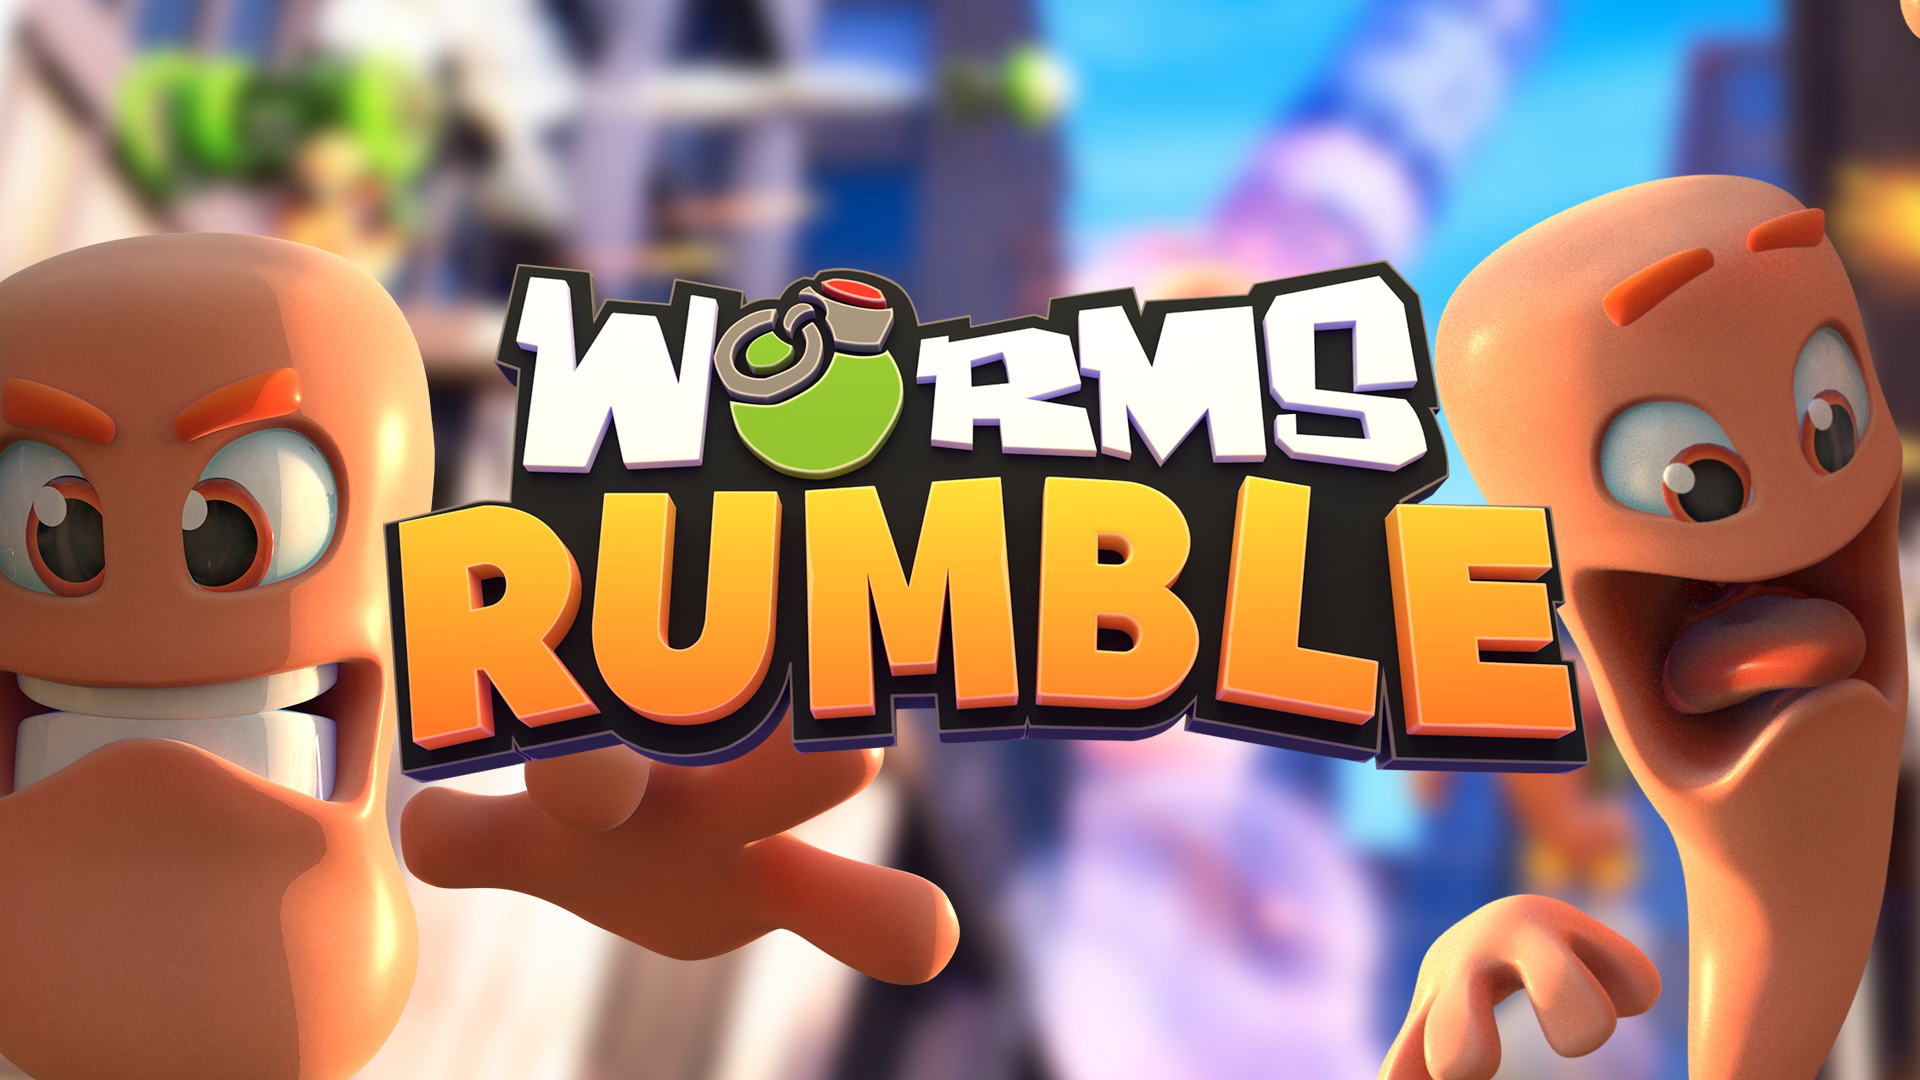 Worms Rumble Is Available Now! - Team17 Digital LTD - The Spirit Of  Independent Games